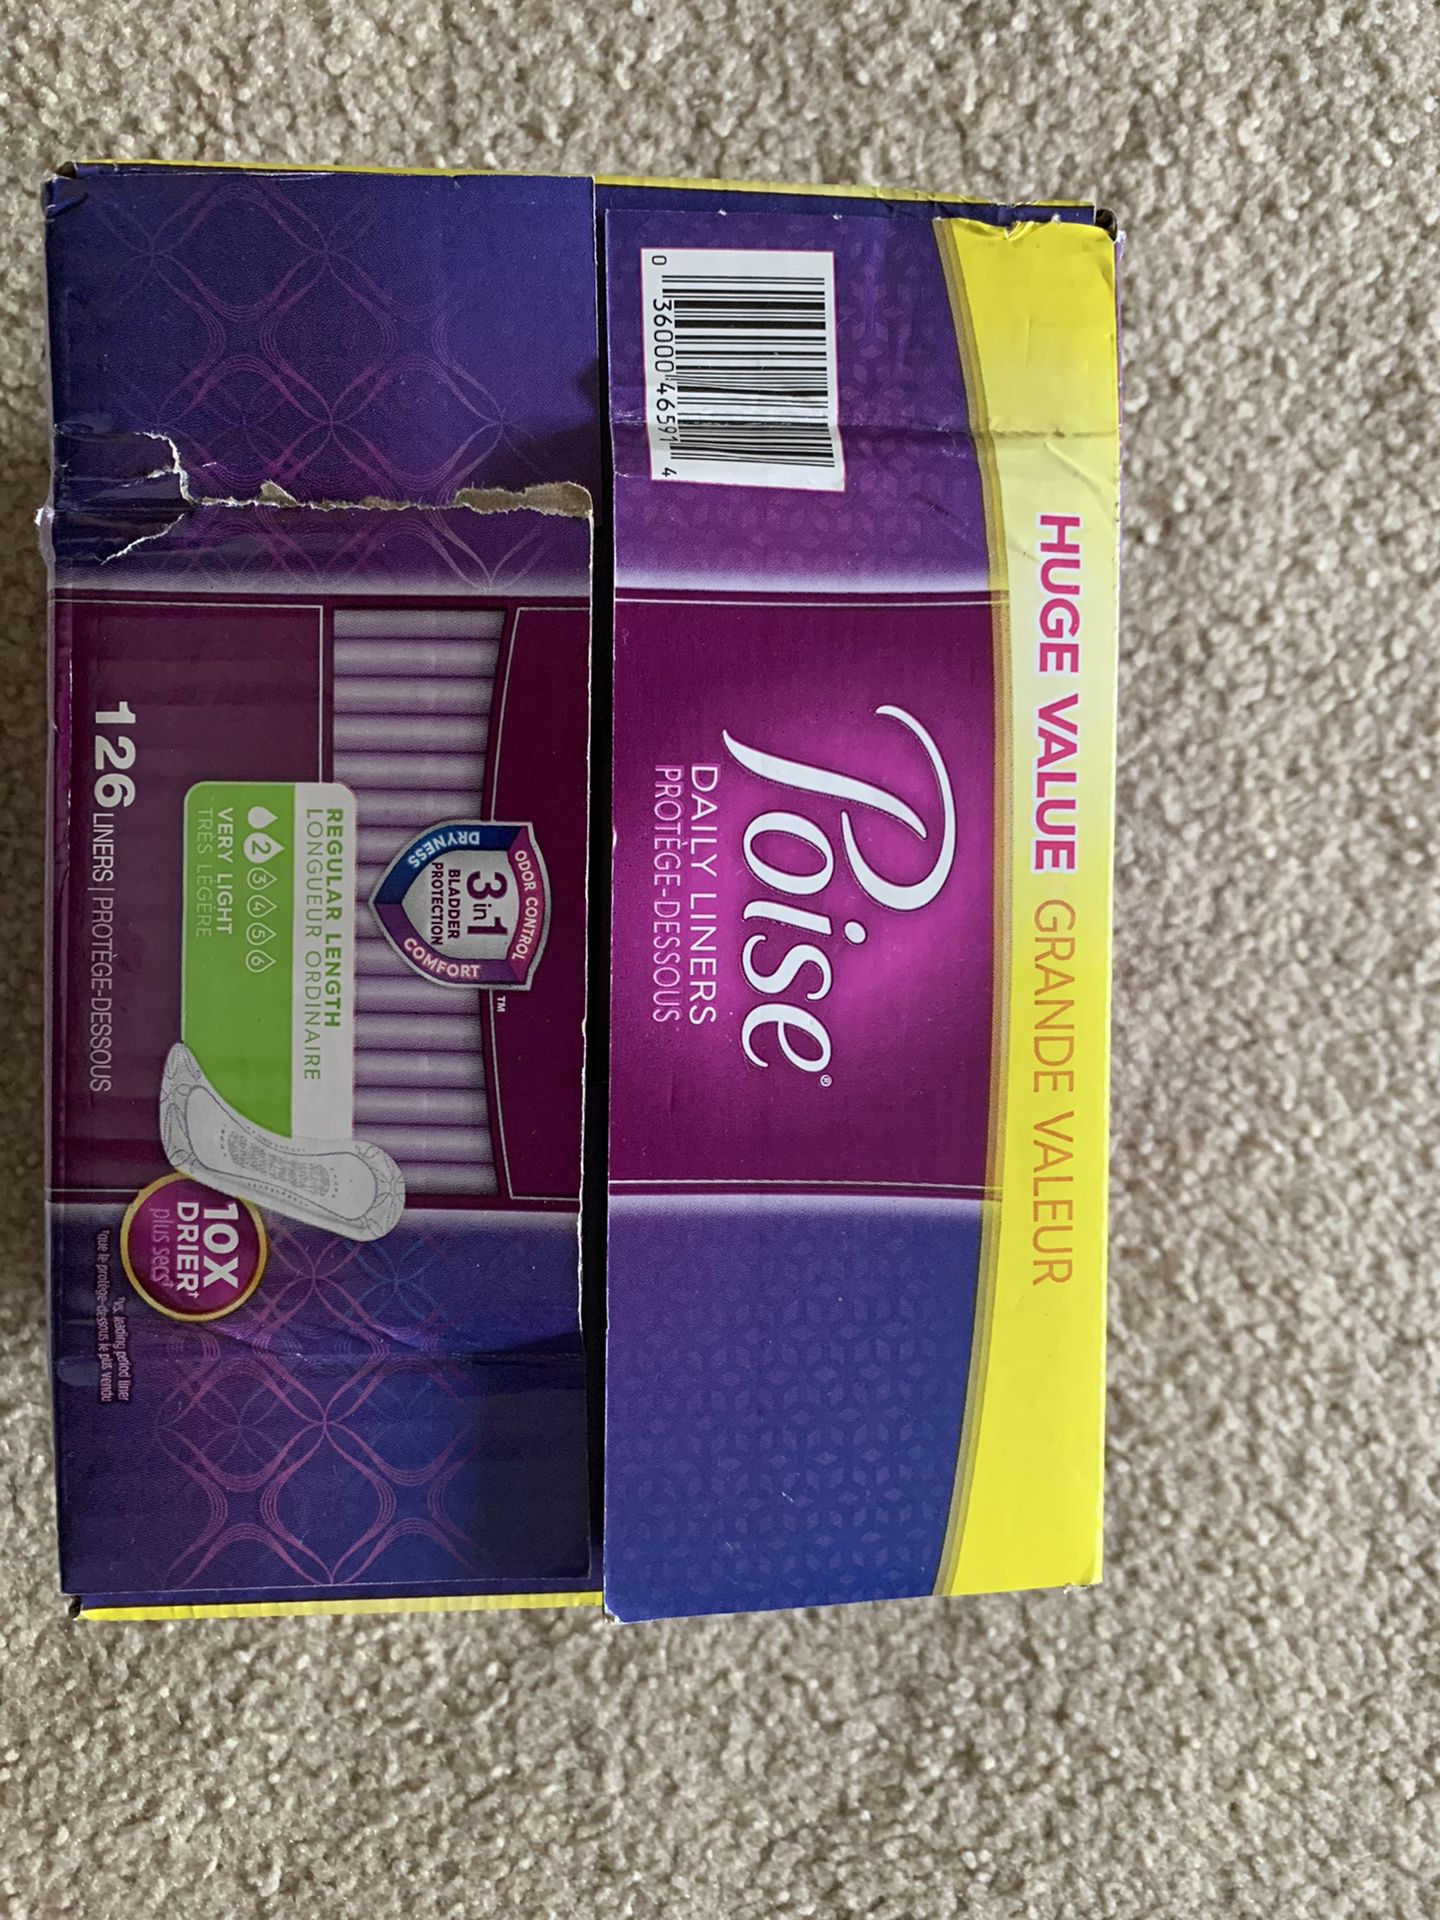 Poise Daily Panty Liners Sealed Box 126 Count Regular Length